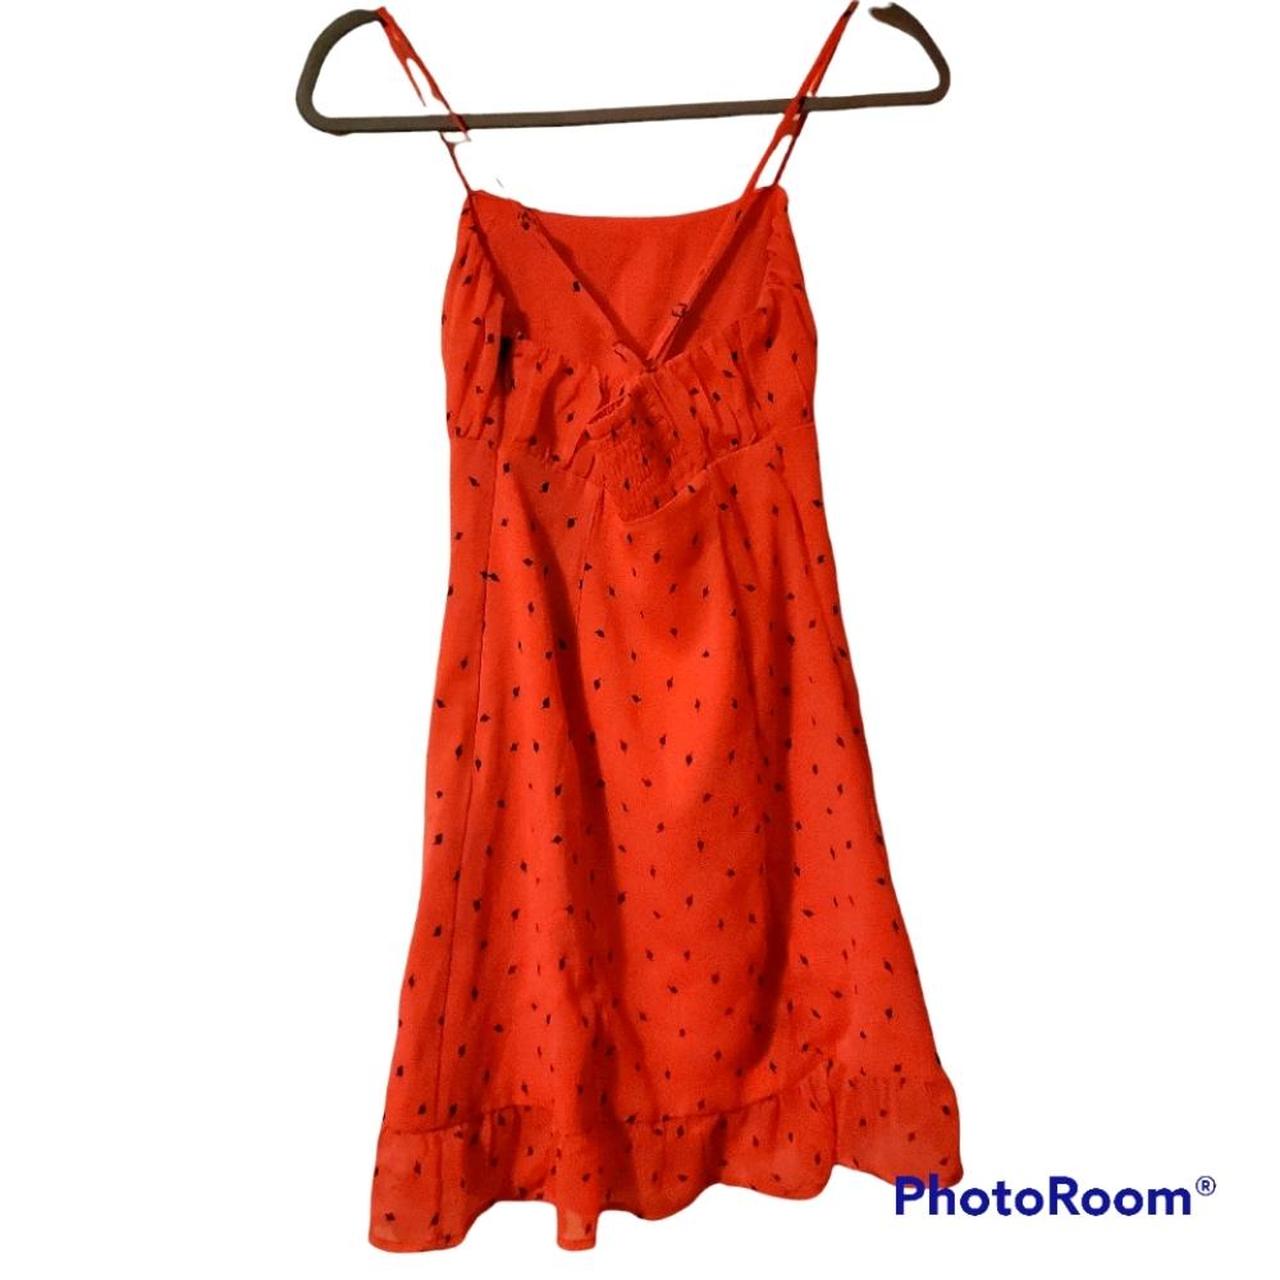 Product Image 1 - Coral pink dress with adjustable